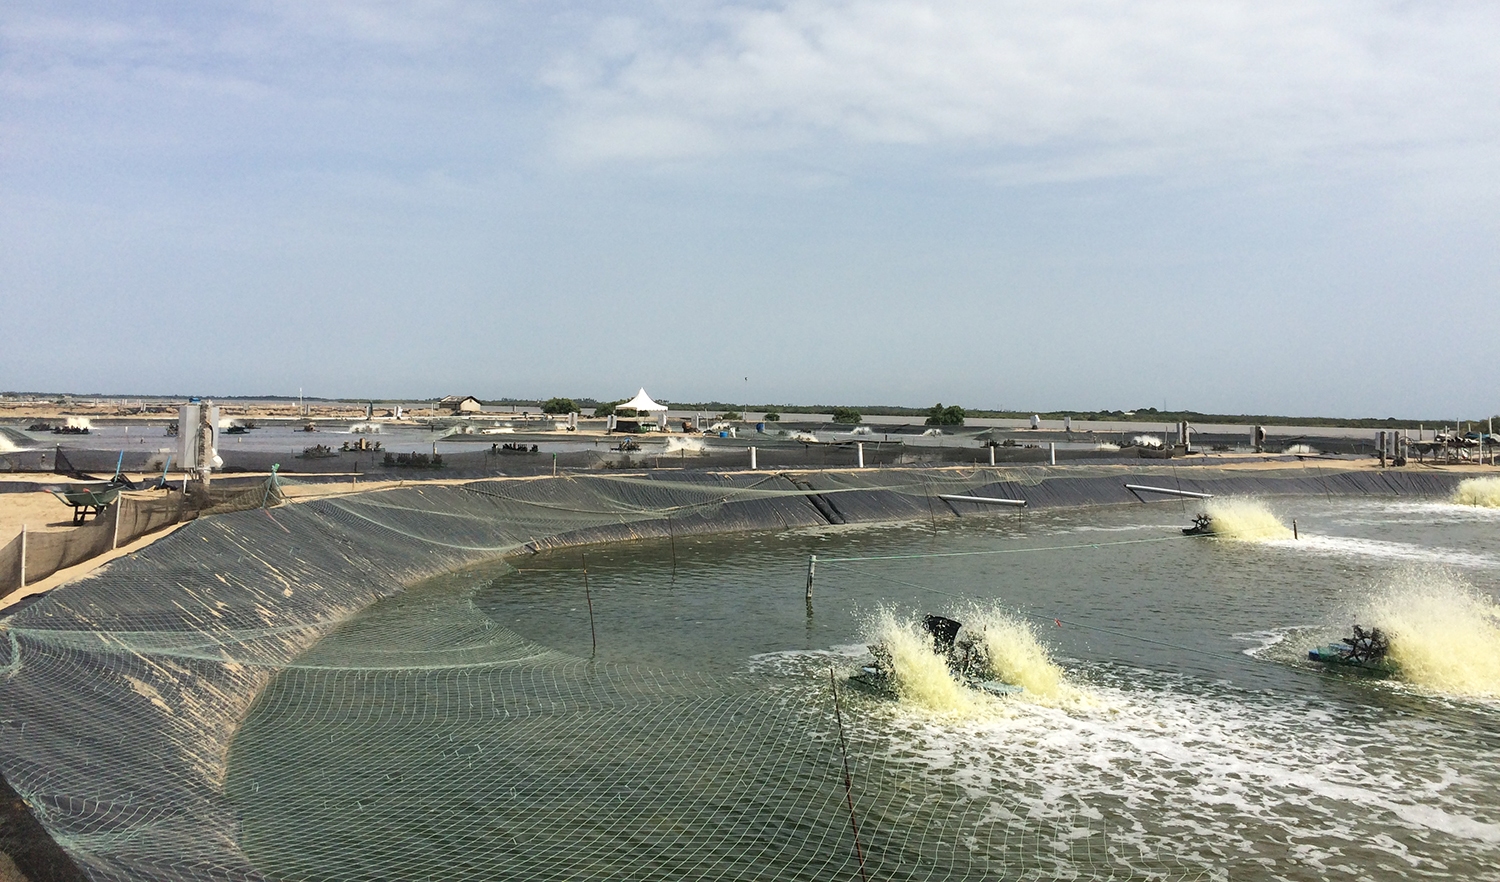 India’s shrimp industry adapts to COVID-19 restrictions